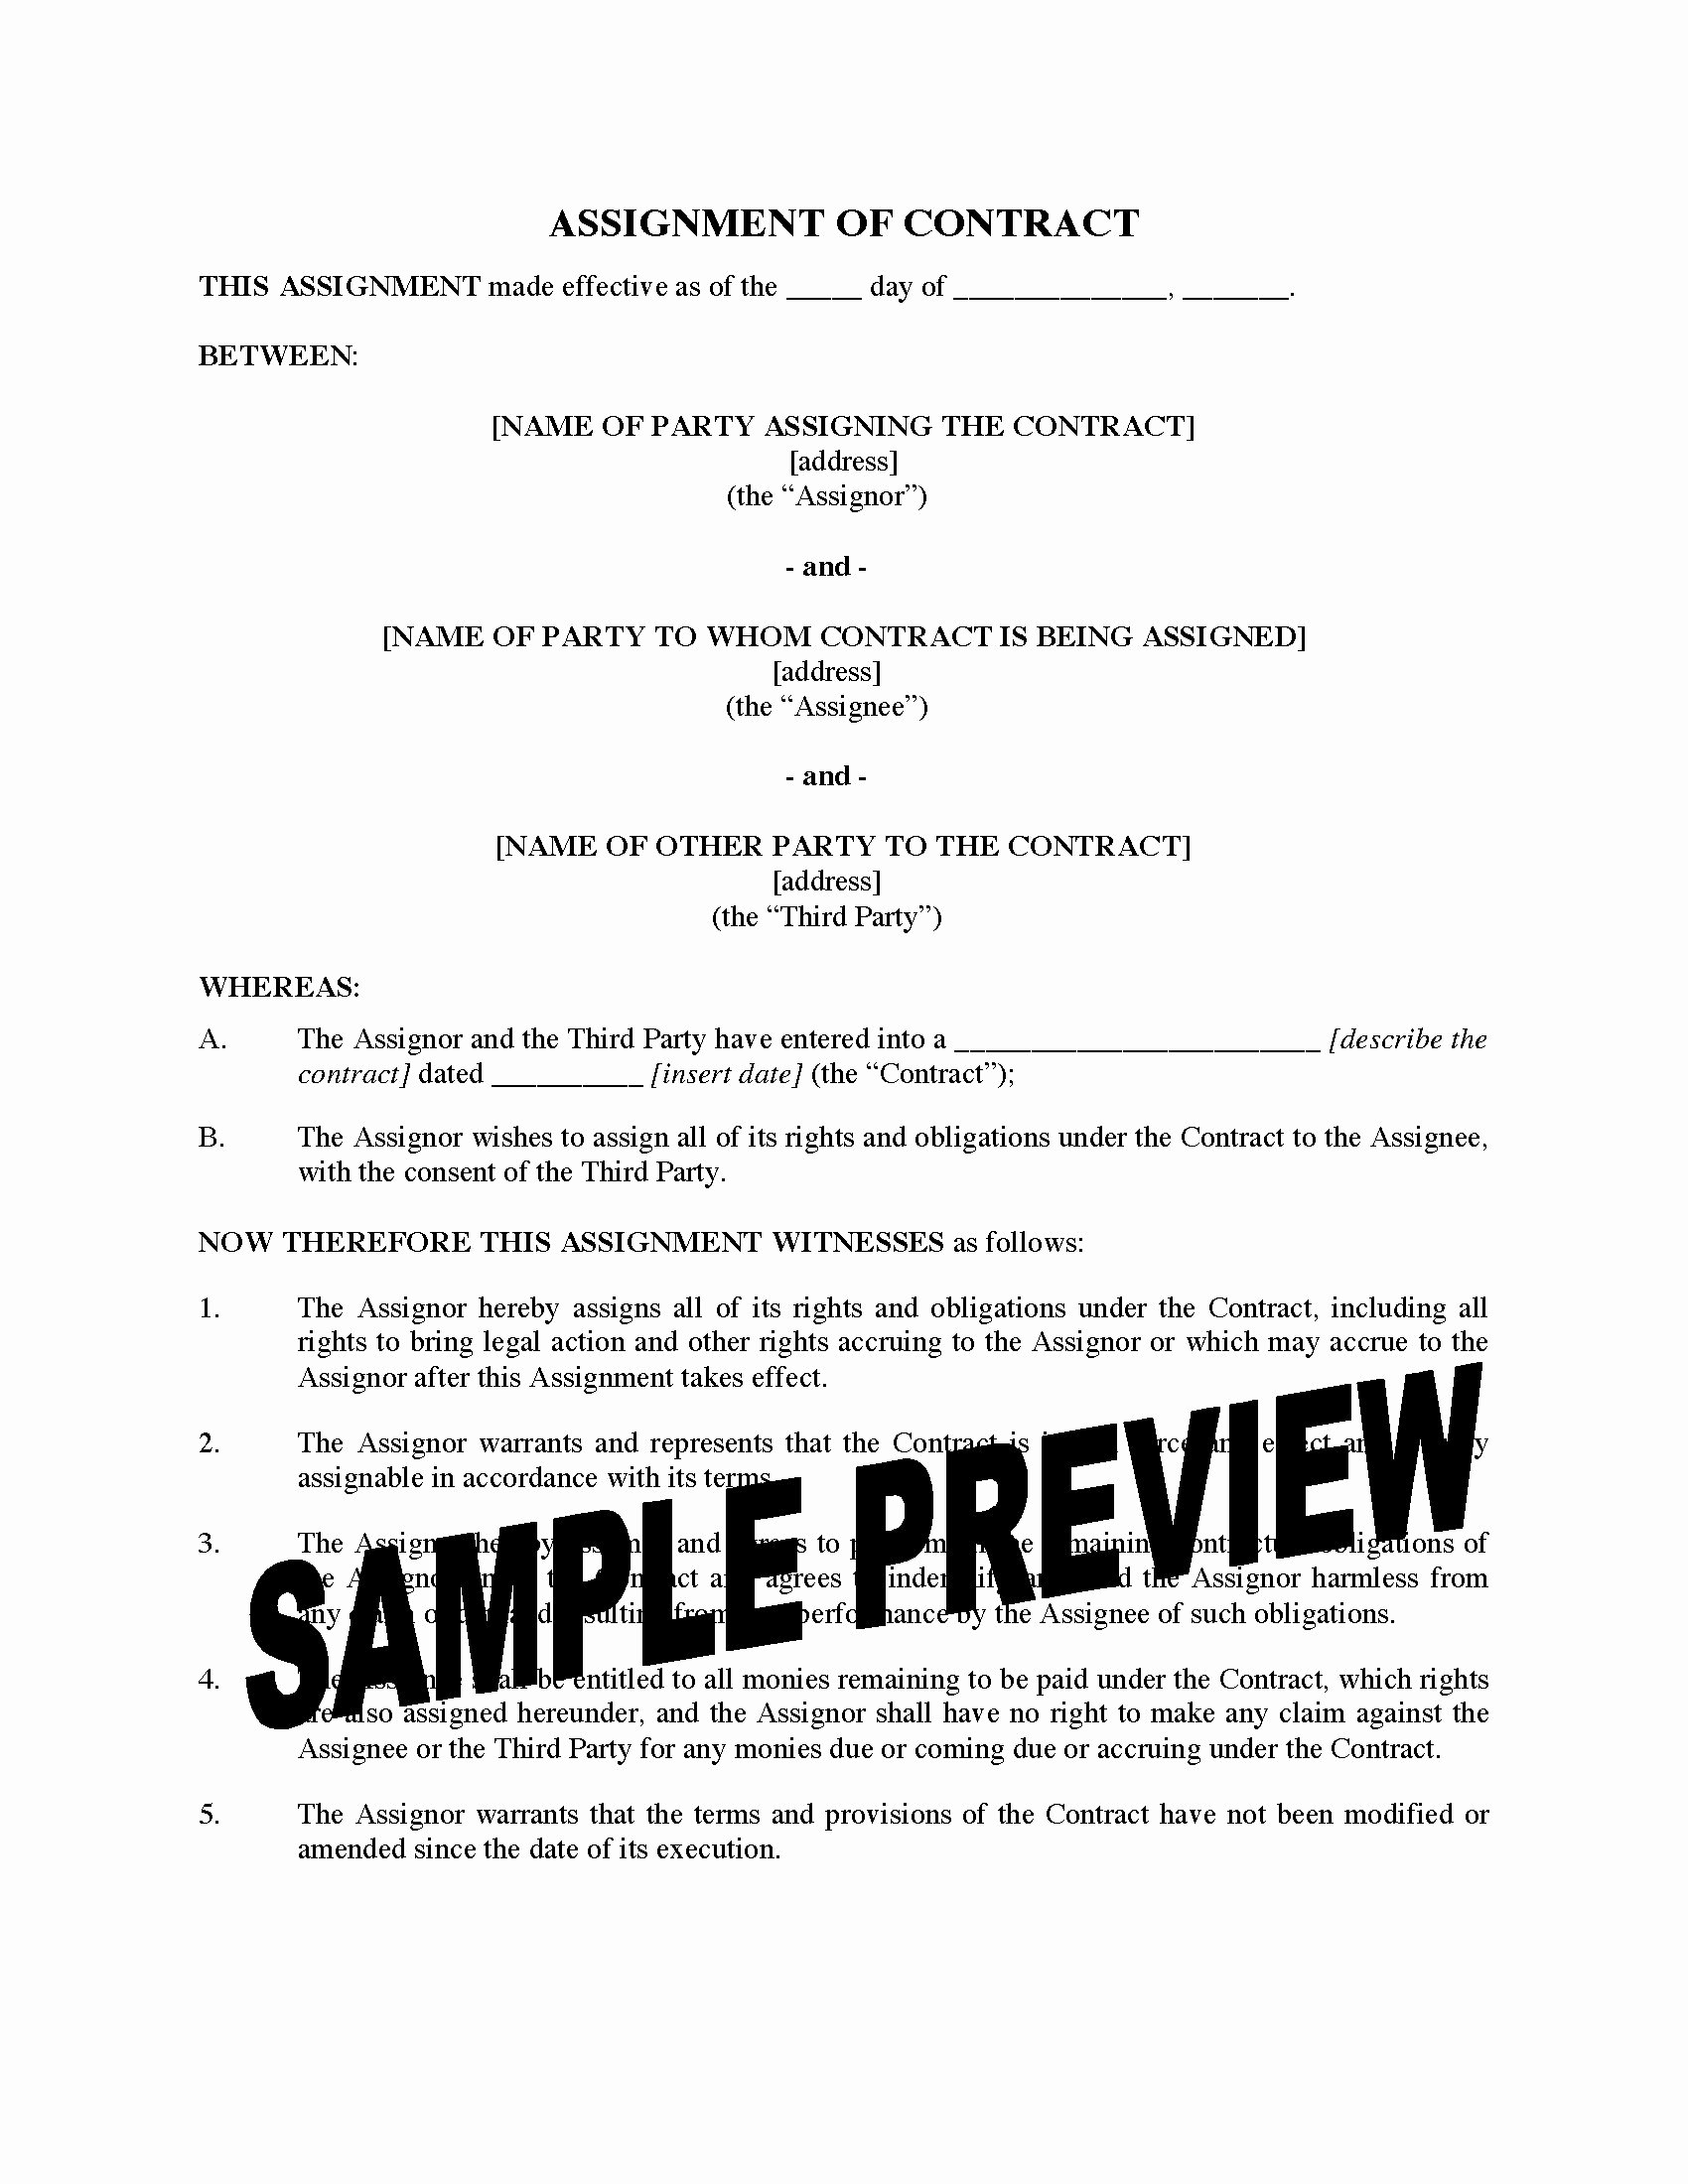 Assignment Of Contract Template Awesome assignment Of Contract to Third Party